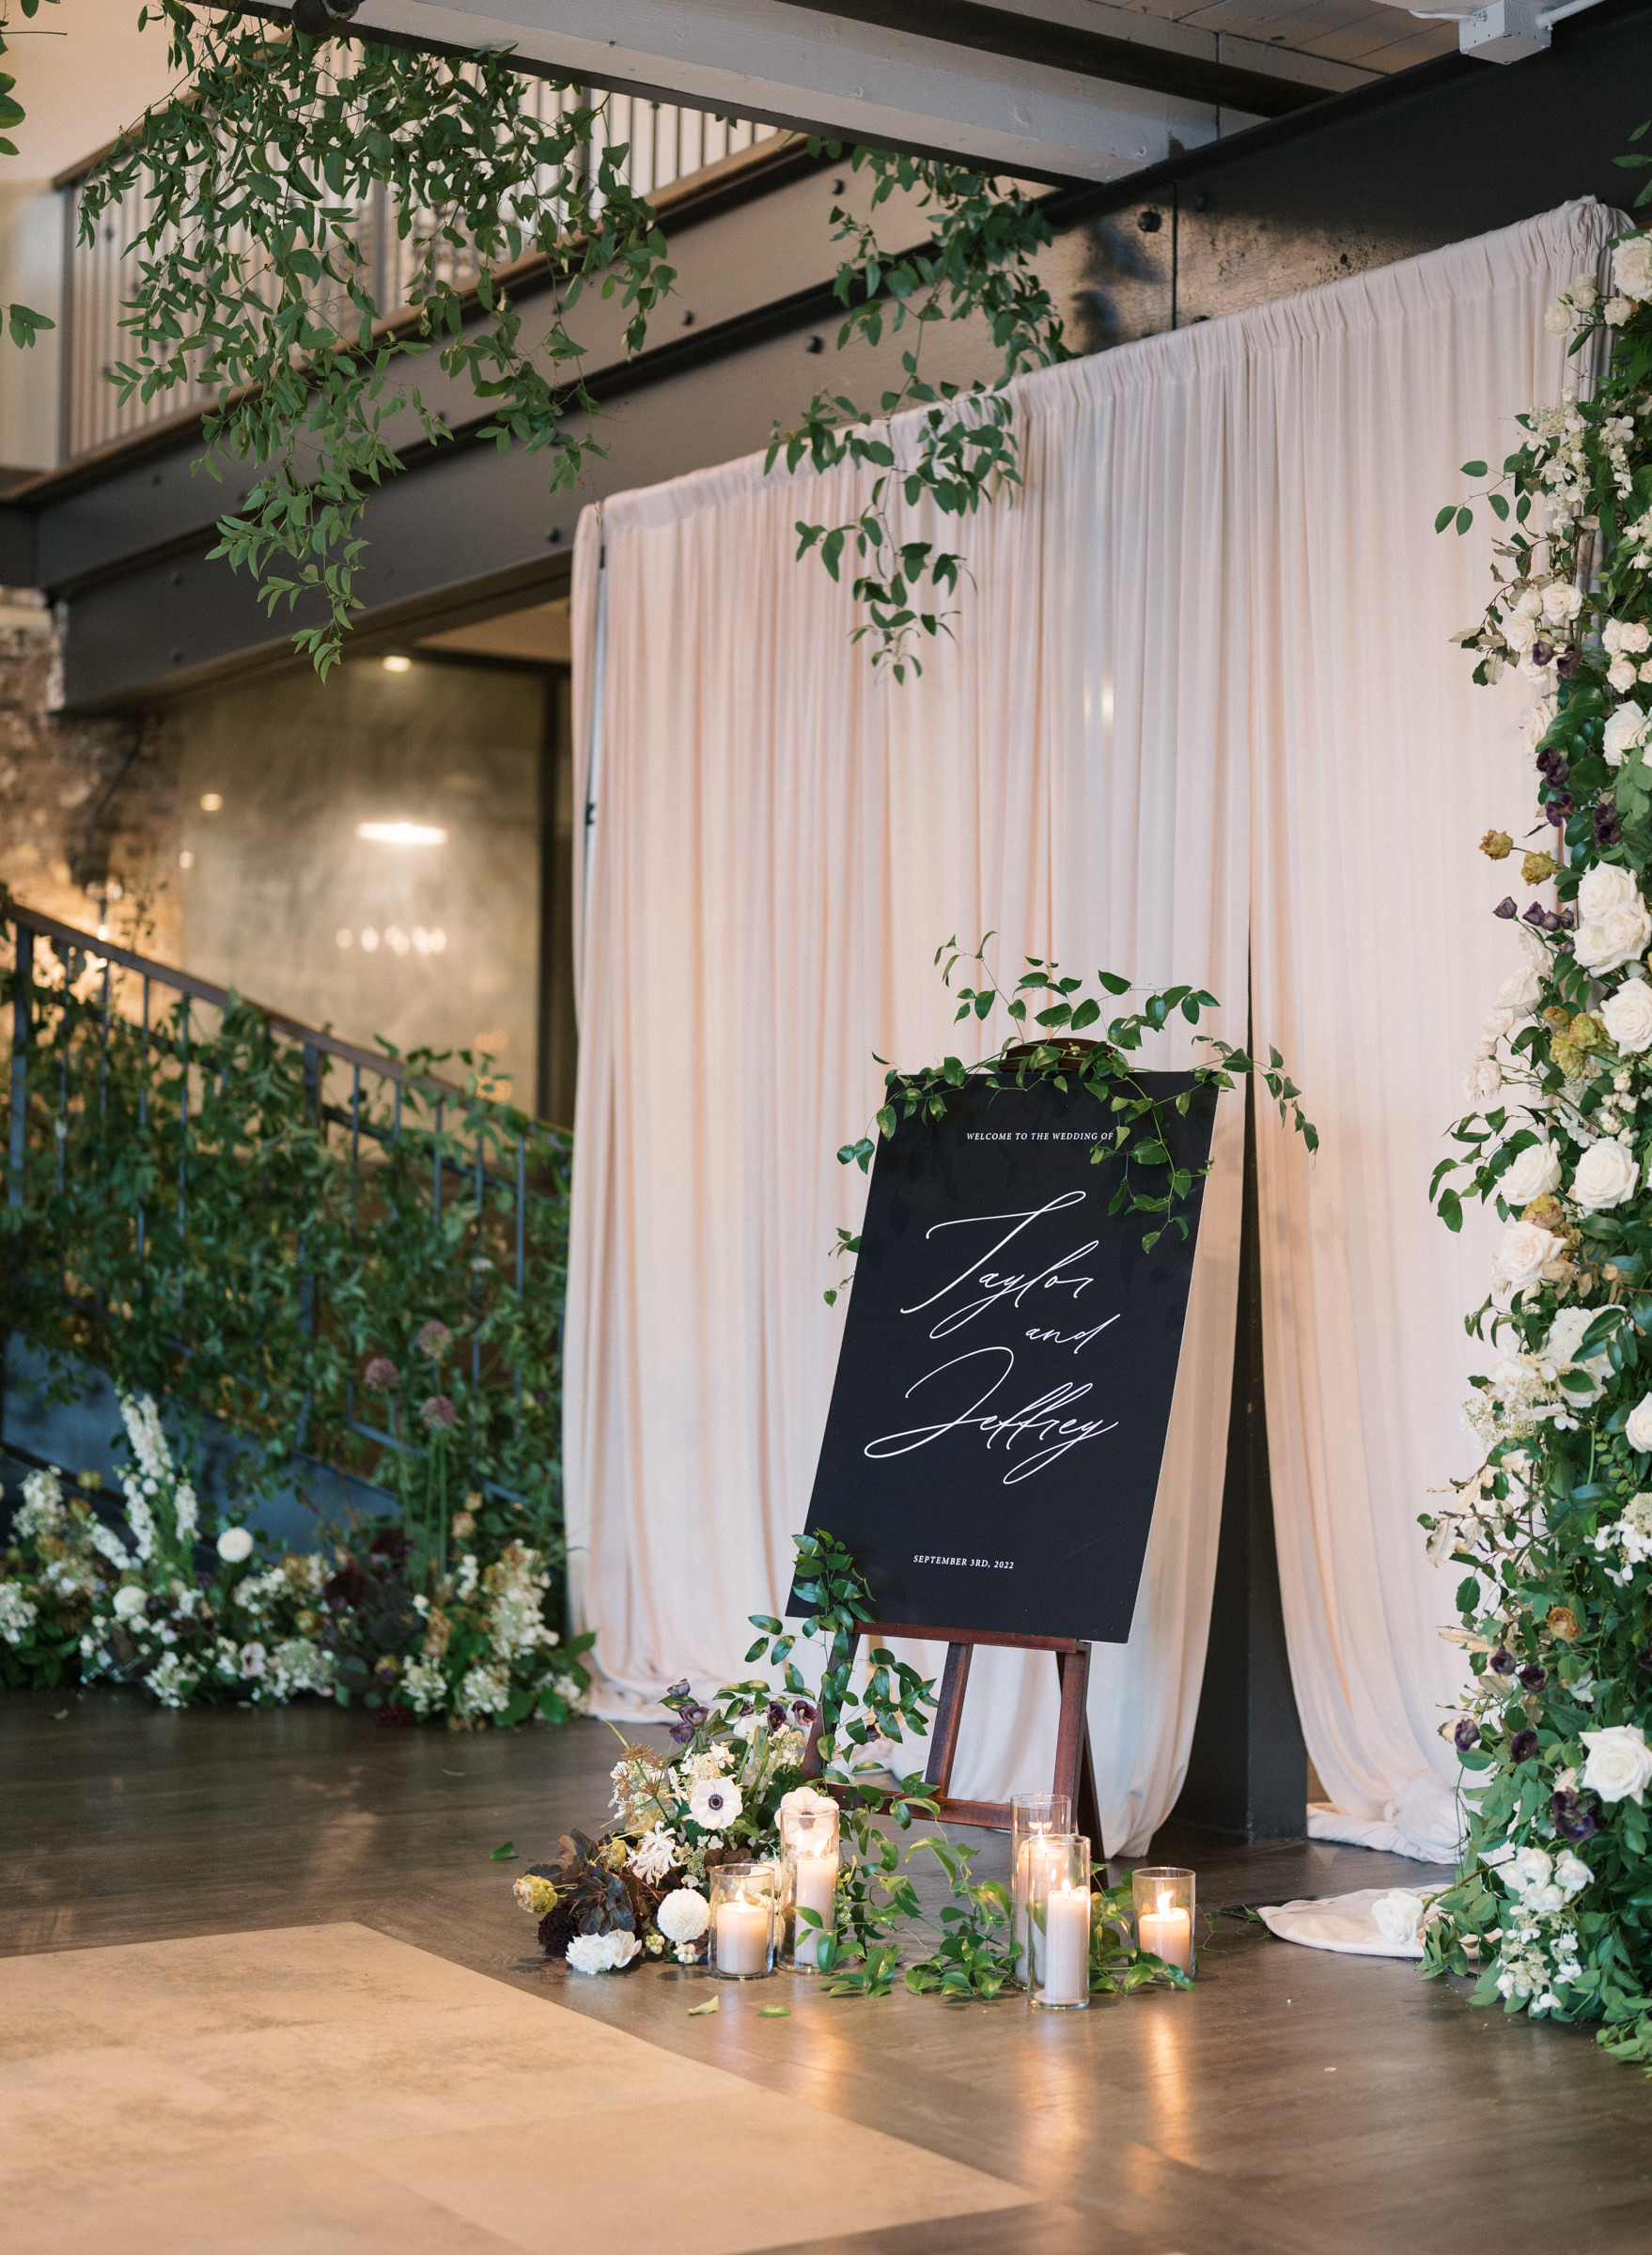 Elevate events design a wedding at the gage milwaukee venue